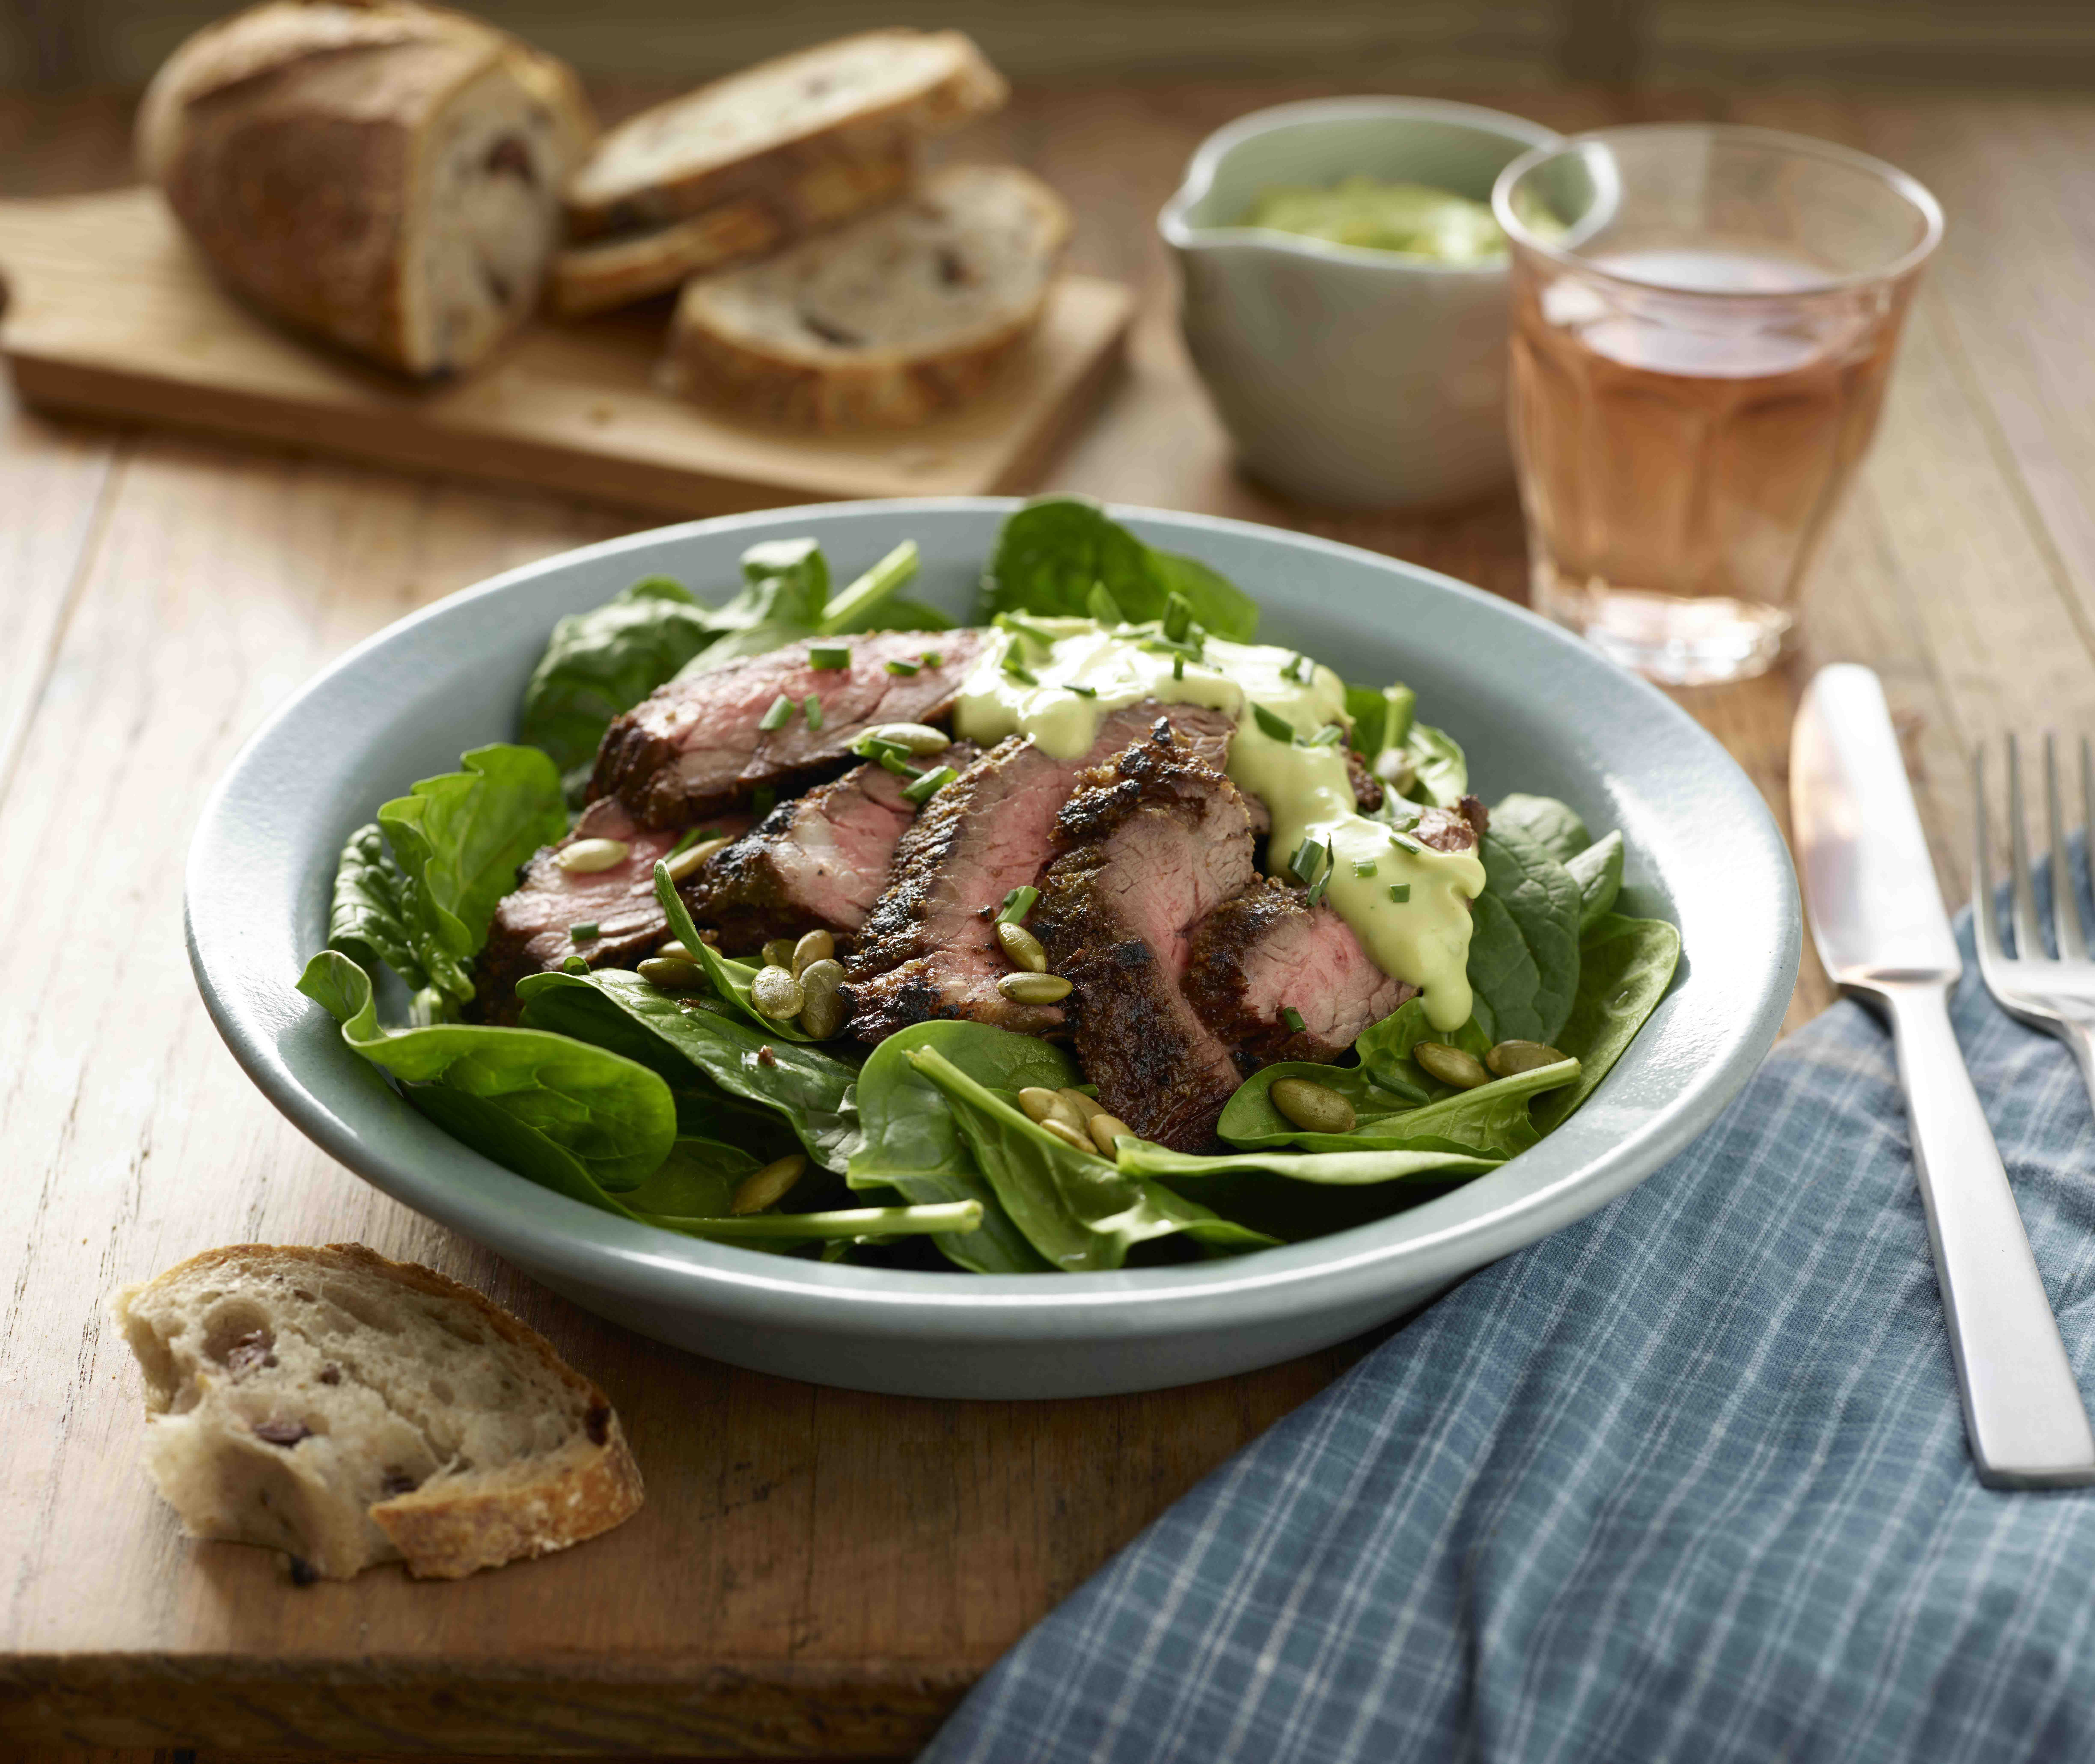 Steak and Spinach Salad with Avocado Dressing